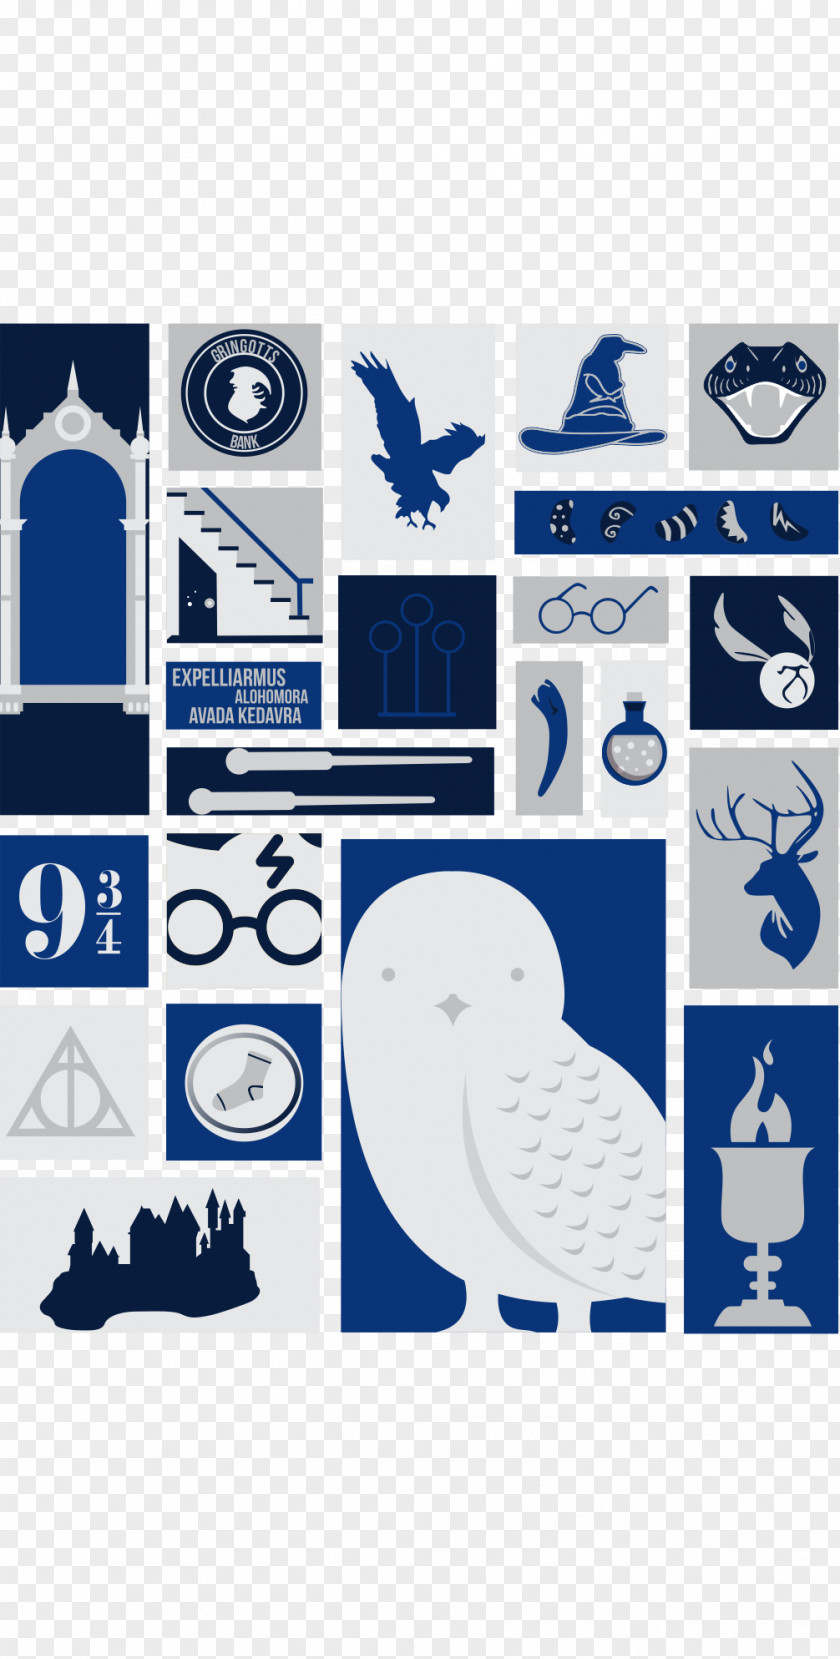 Harry Potter Always (Literary Series) And The Deathly Hallows Price Slytherin House Ravenclaw PNG